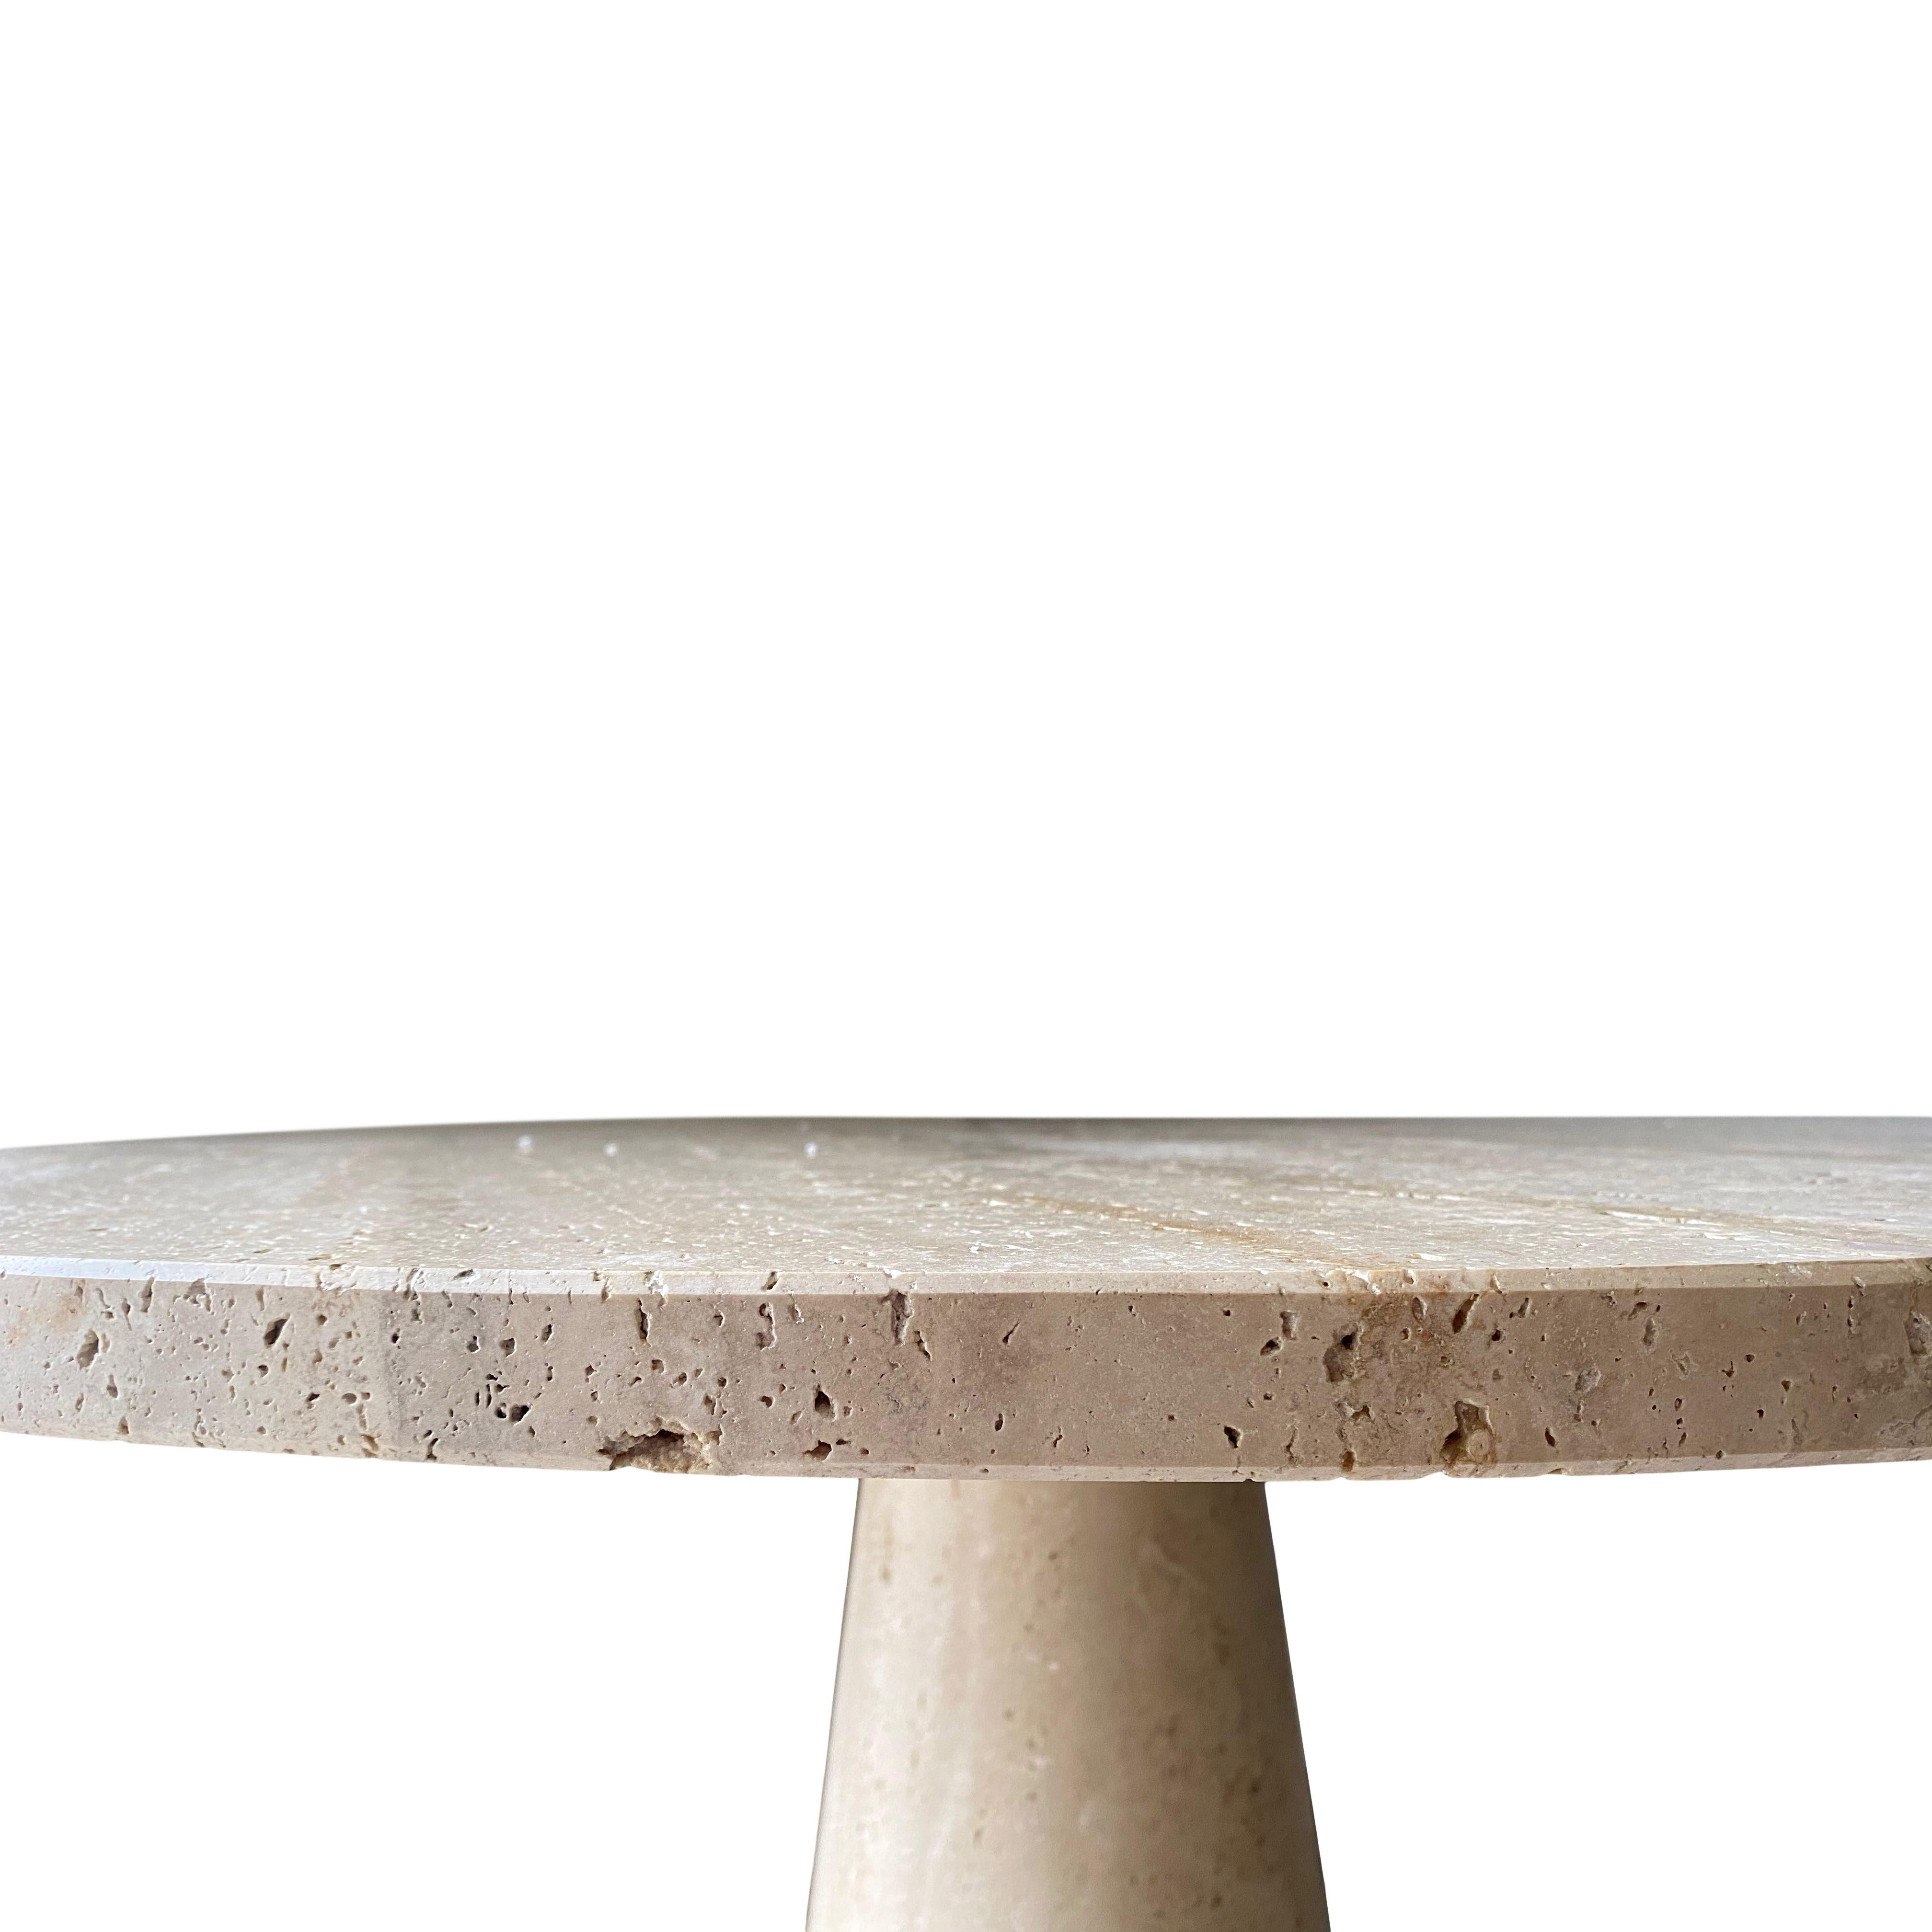 Bespoke Round Italian Travertine Dining Table In New Condition For Sale In London, London